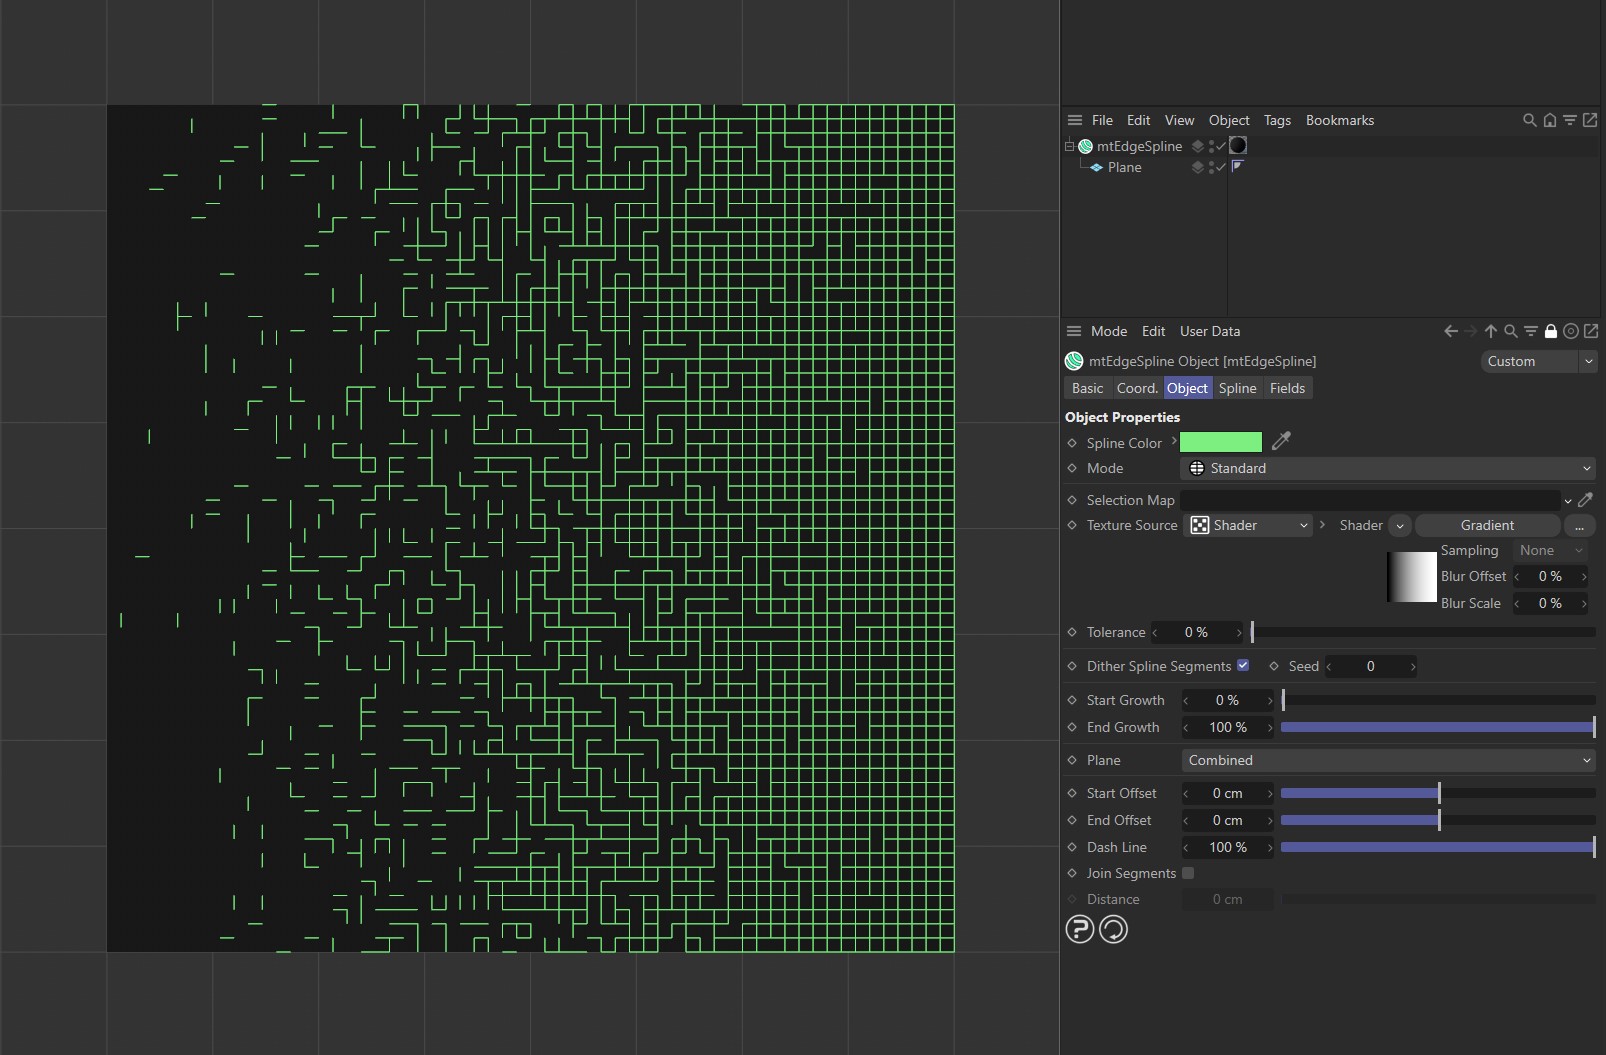 Dither Spline Segments enabled with mtEdgeSpline, driven by a Gradient shader.